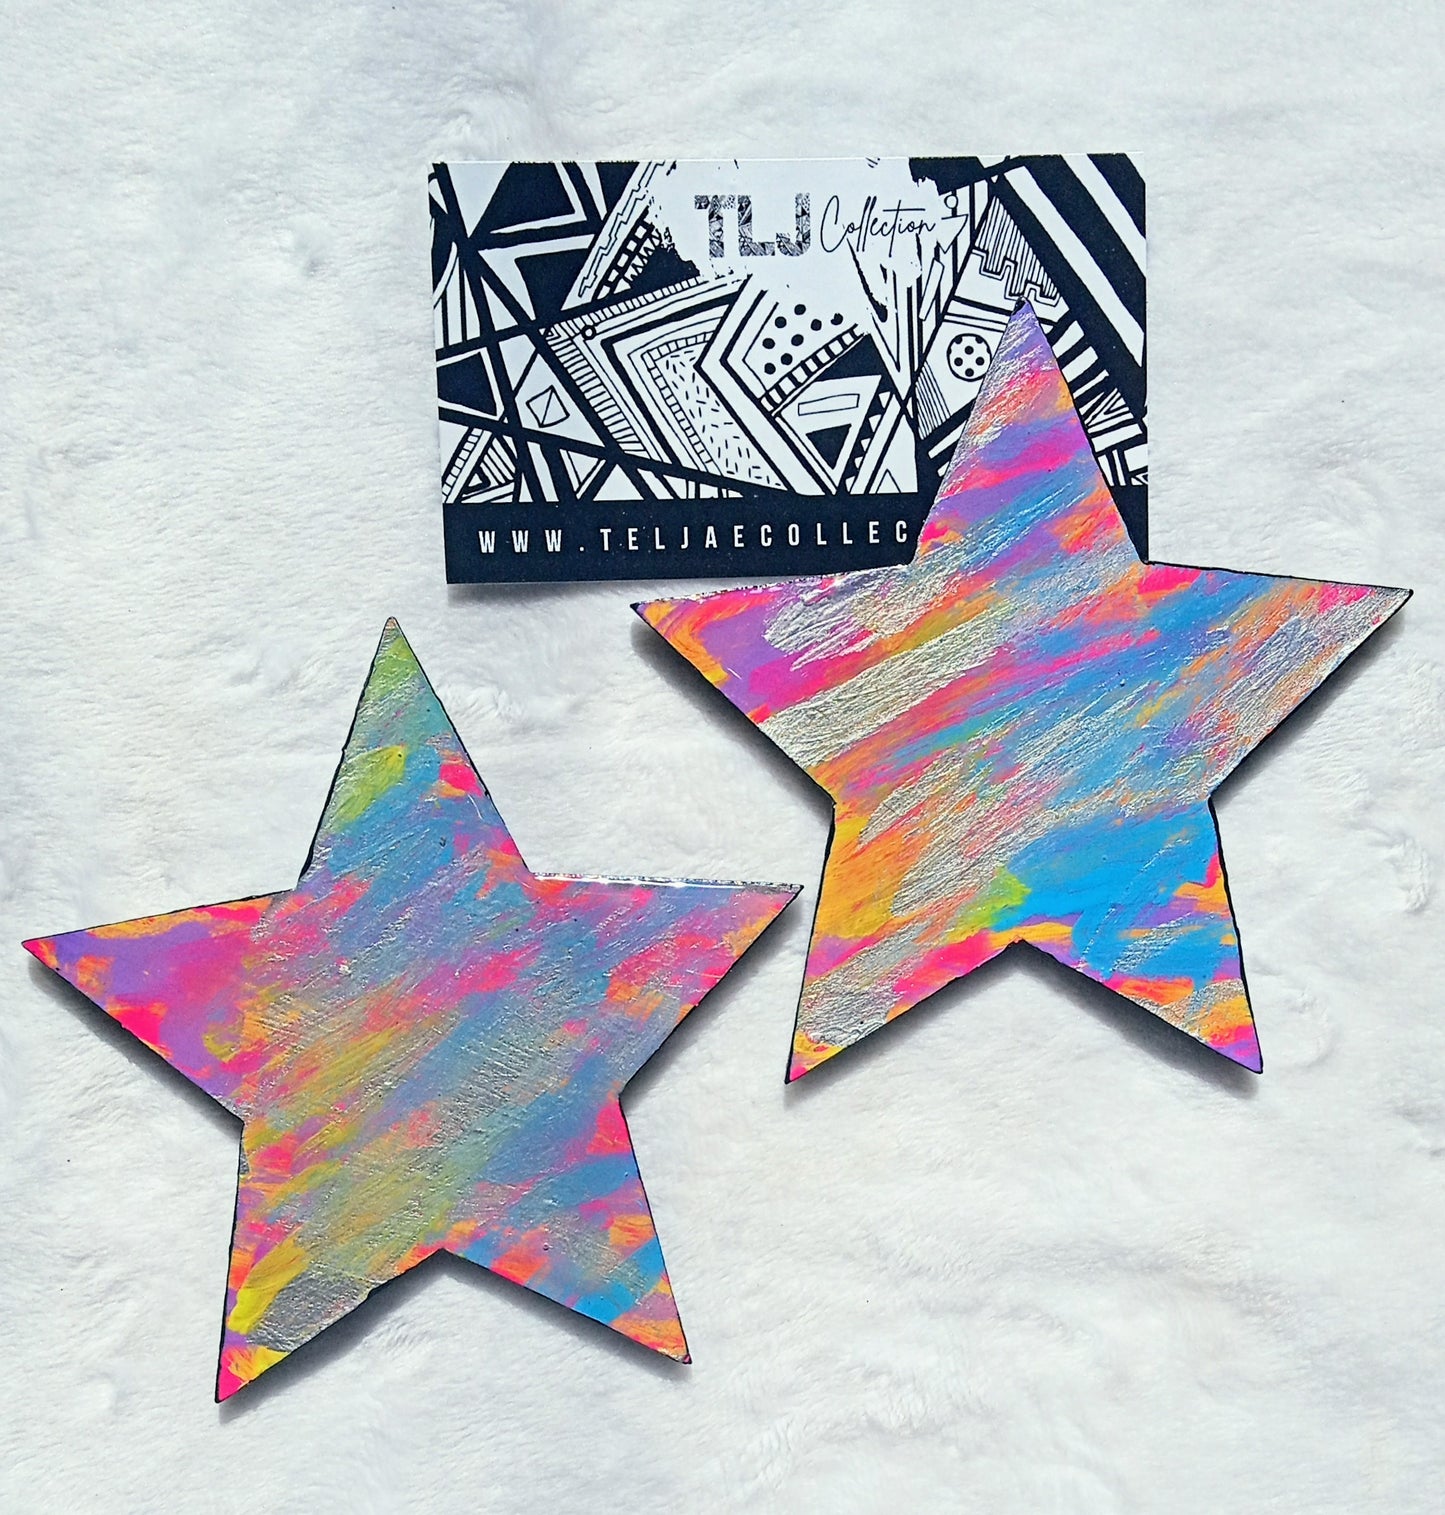 Cotton Candy Stars Earrings